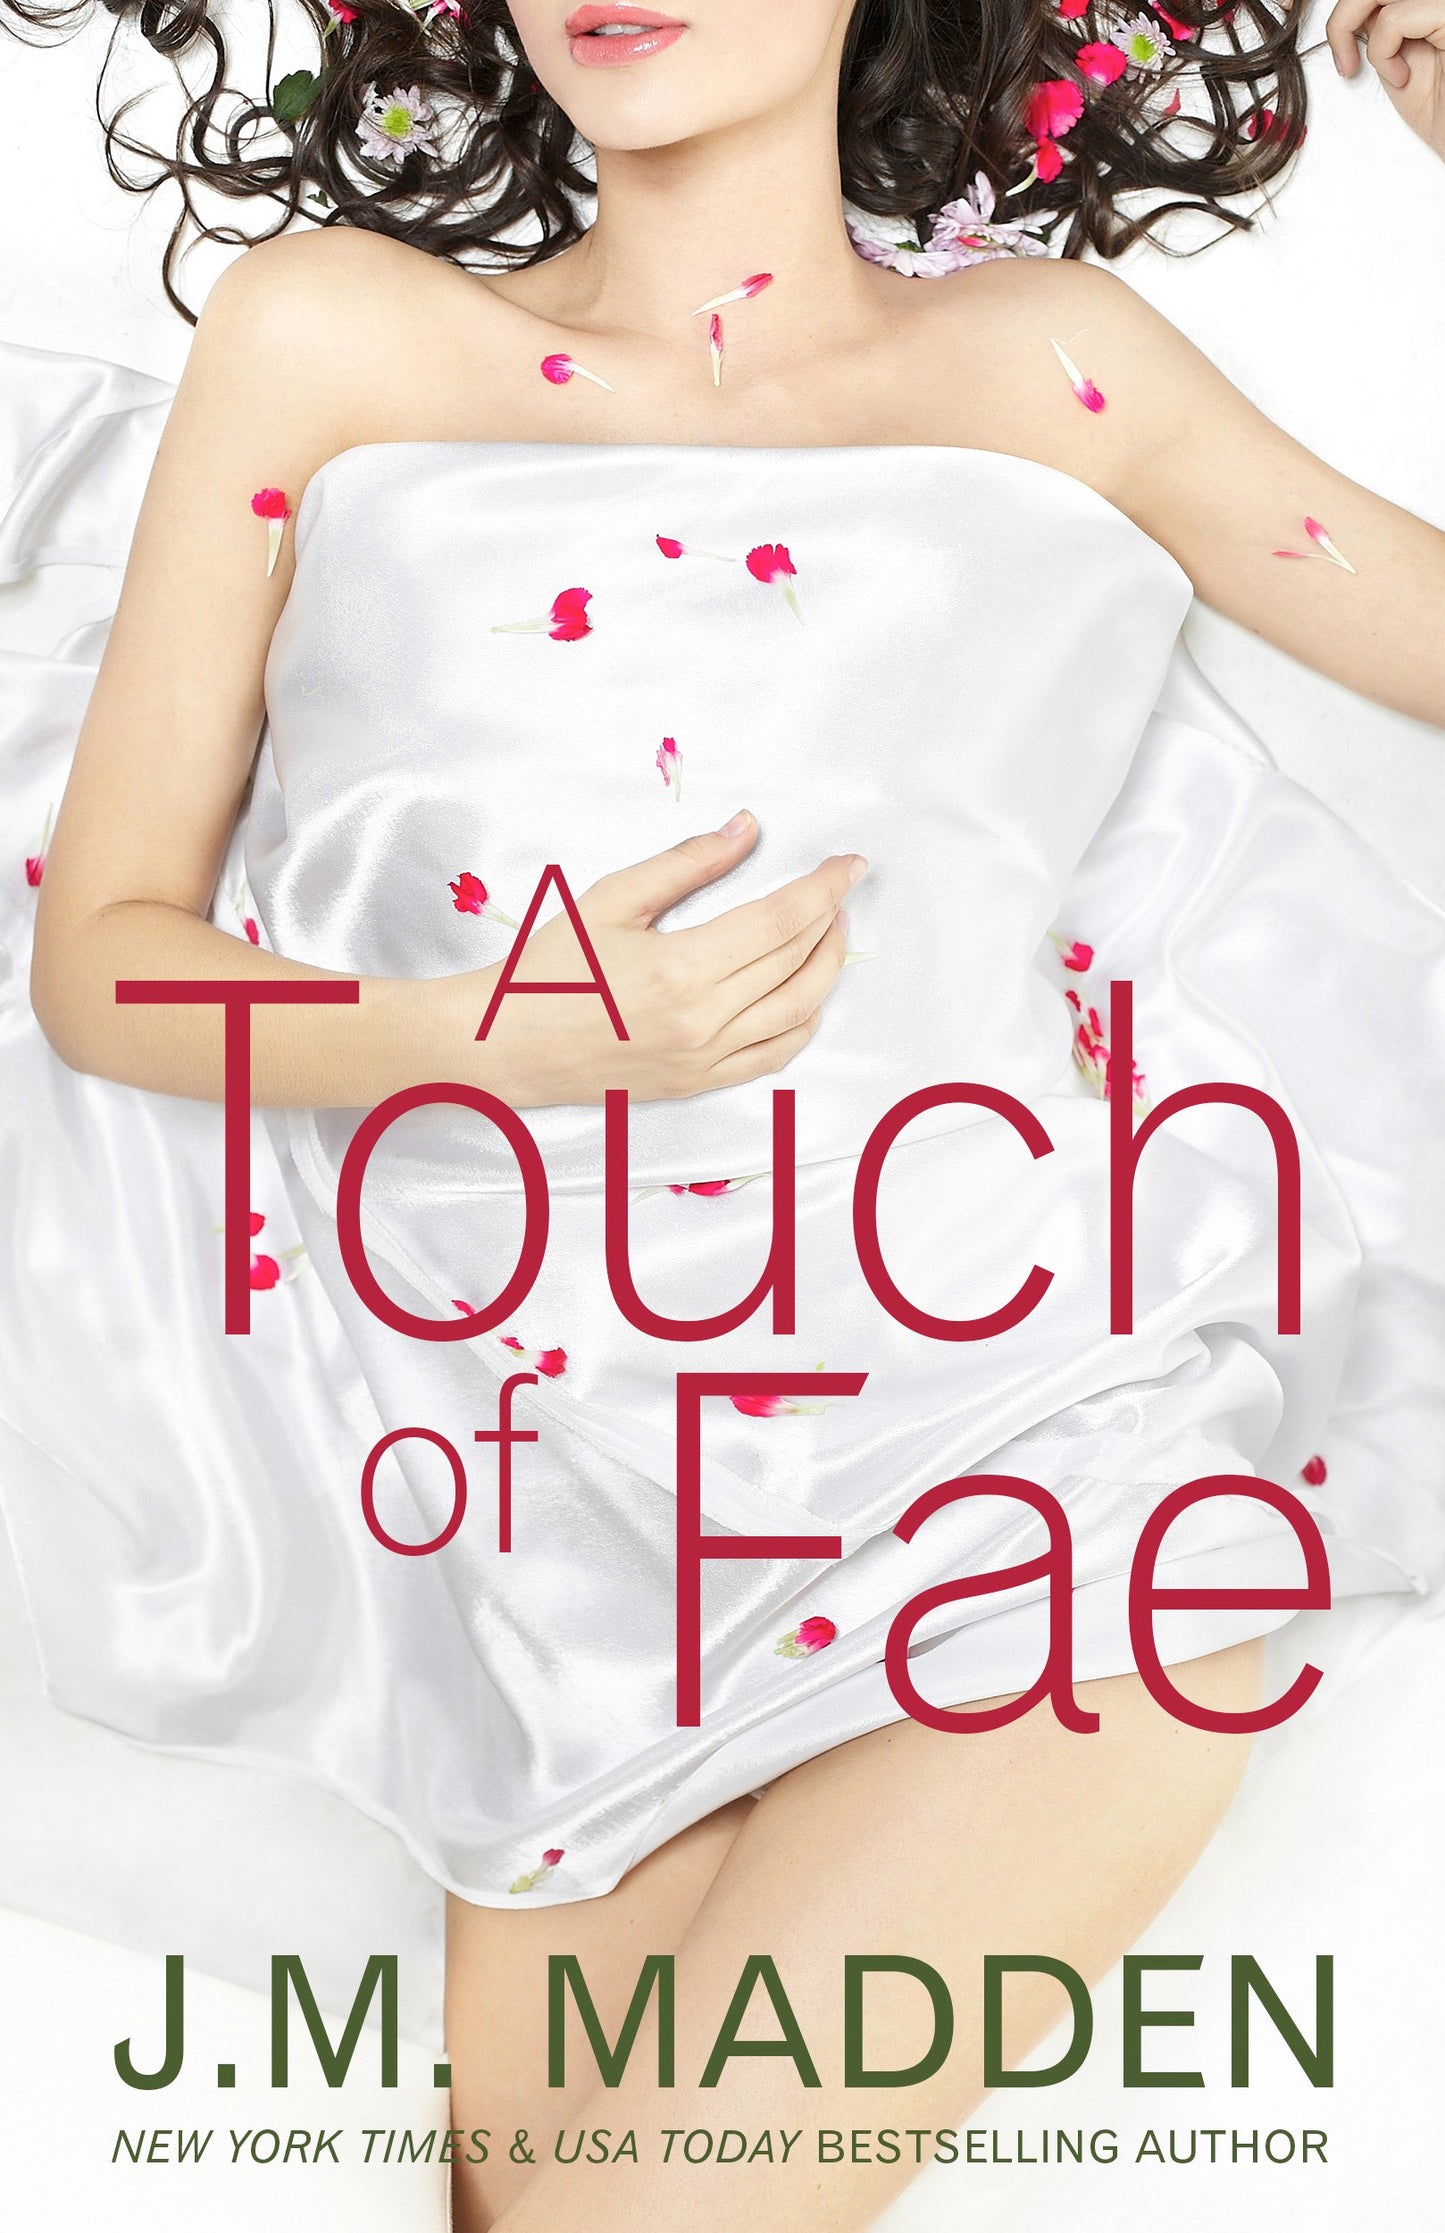 A Touch of Fae